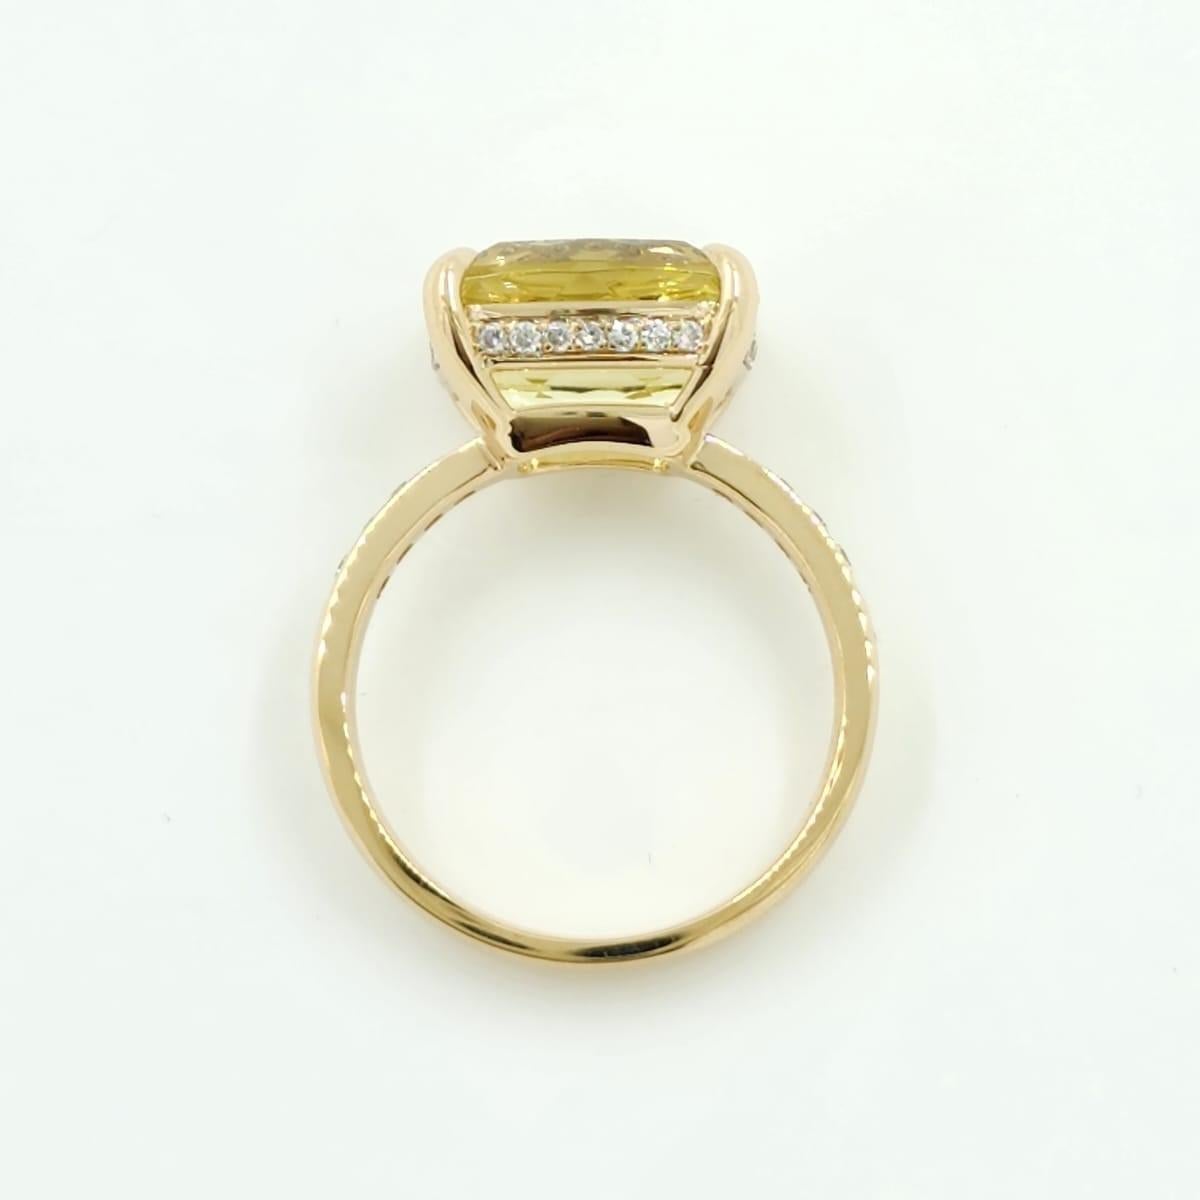 Contemporary Vintage 4.68 Carat Yellow Beryl Diamond Cocktail Ring in 14 Karat Yellow Gold For Sale